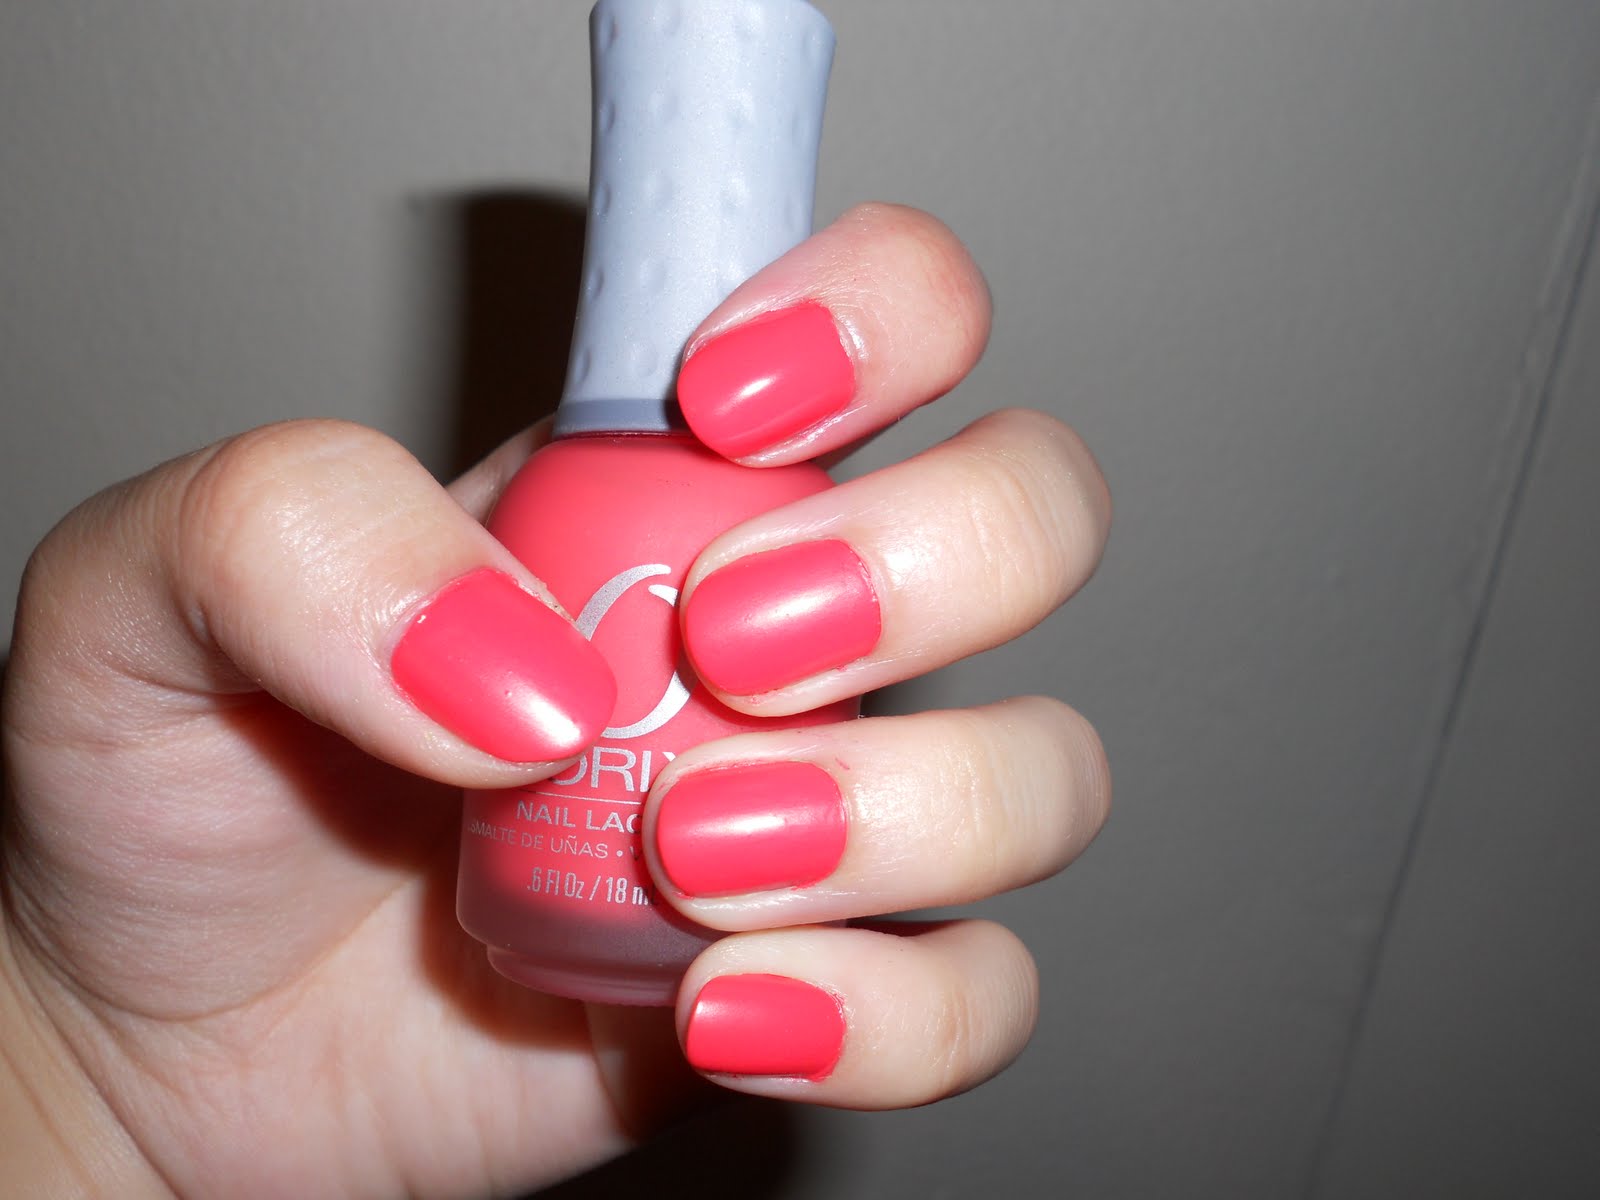 9. Orly Nail Lacquer in "Haute Red" - wide 4